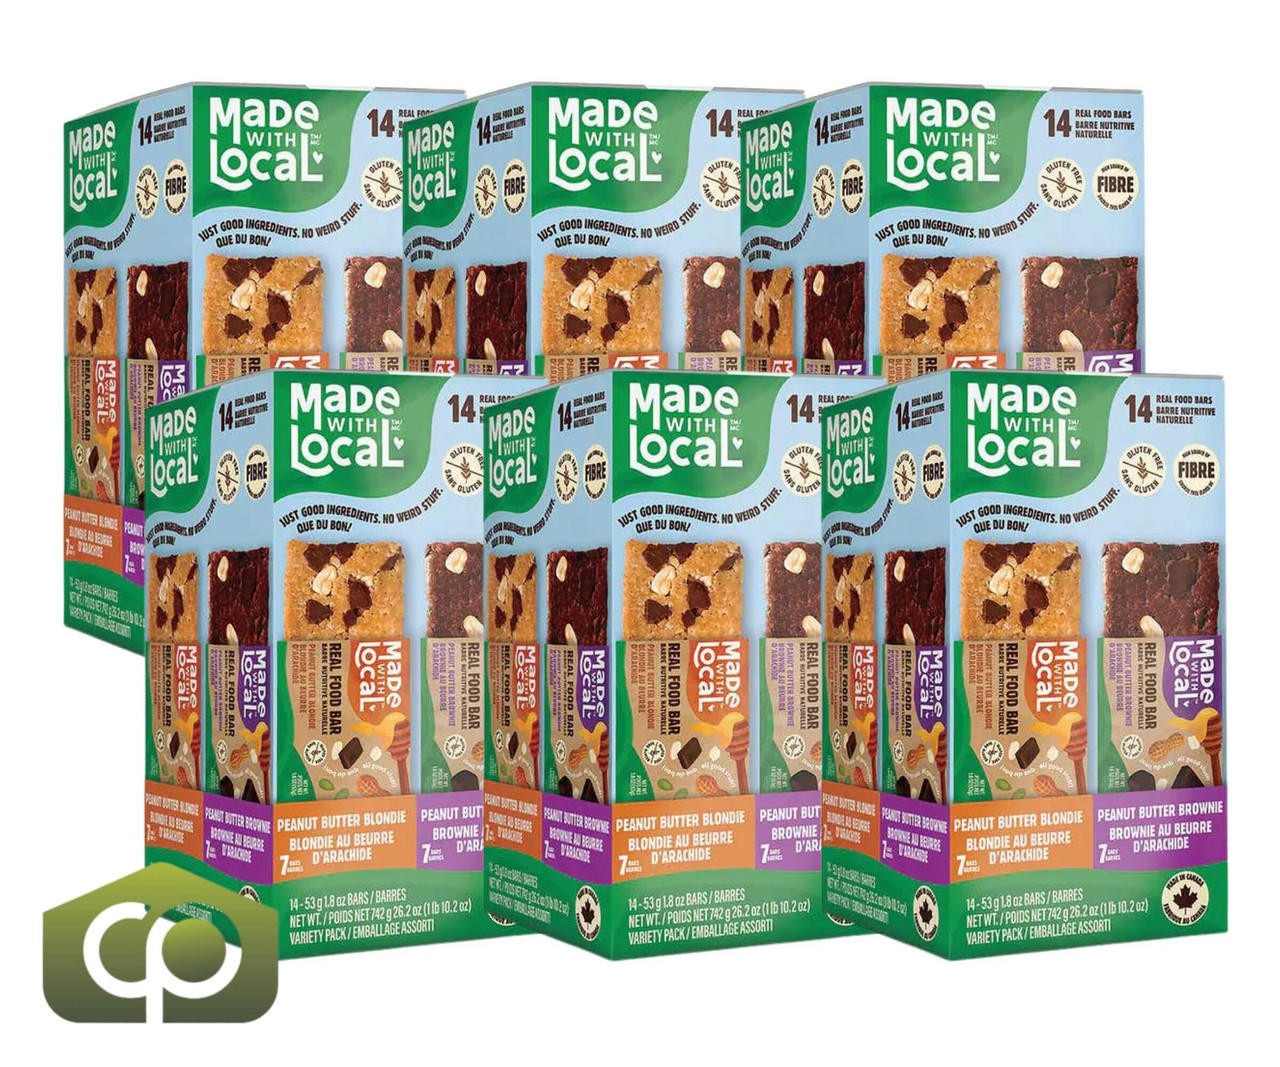  Made with Local Real Food Bars - 28 Bars x 53g, Gluten-Free, Dairy-Free (6/Case) 